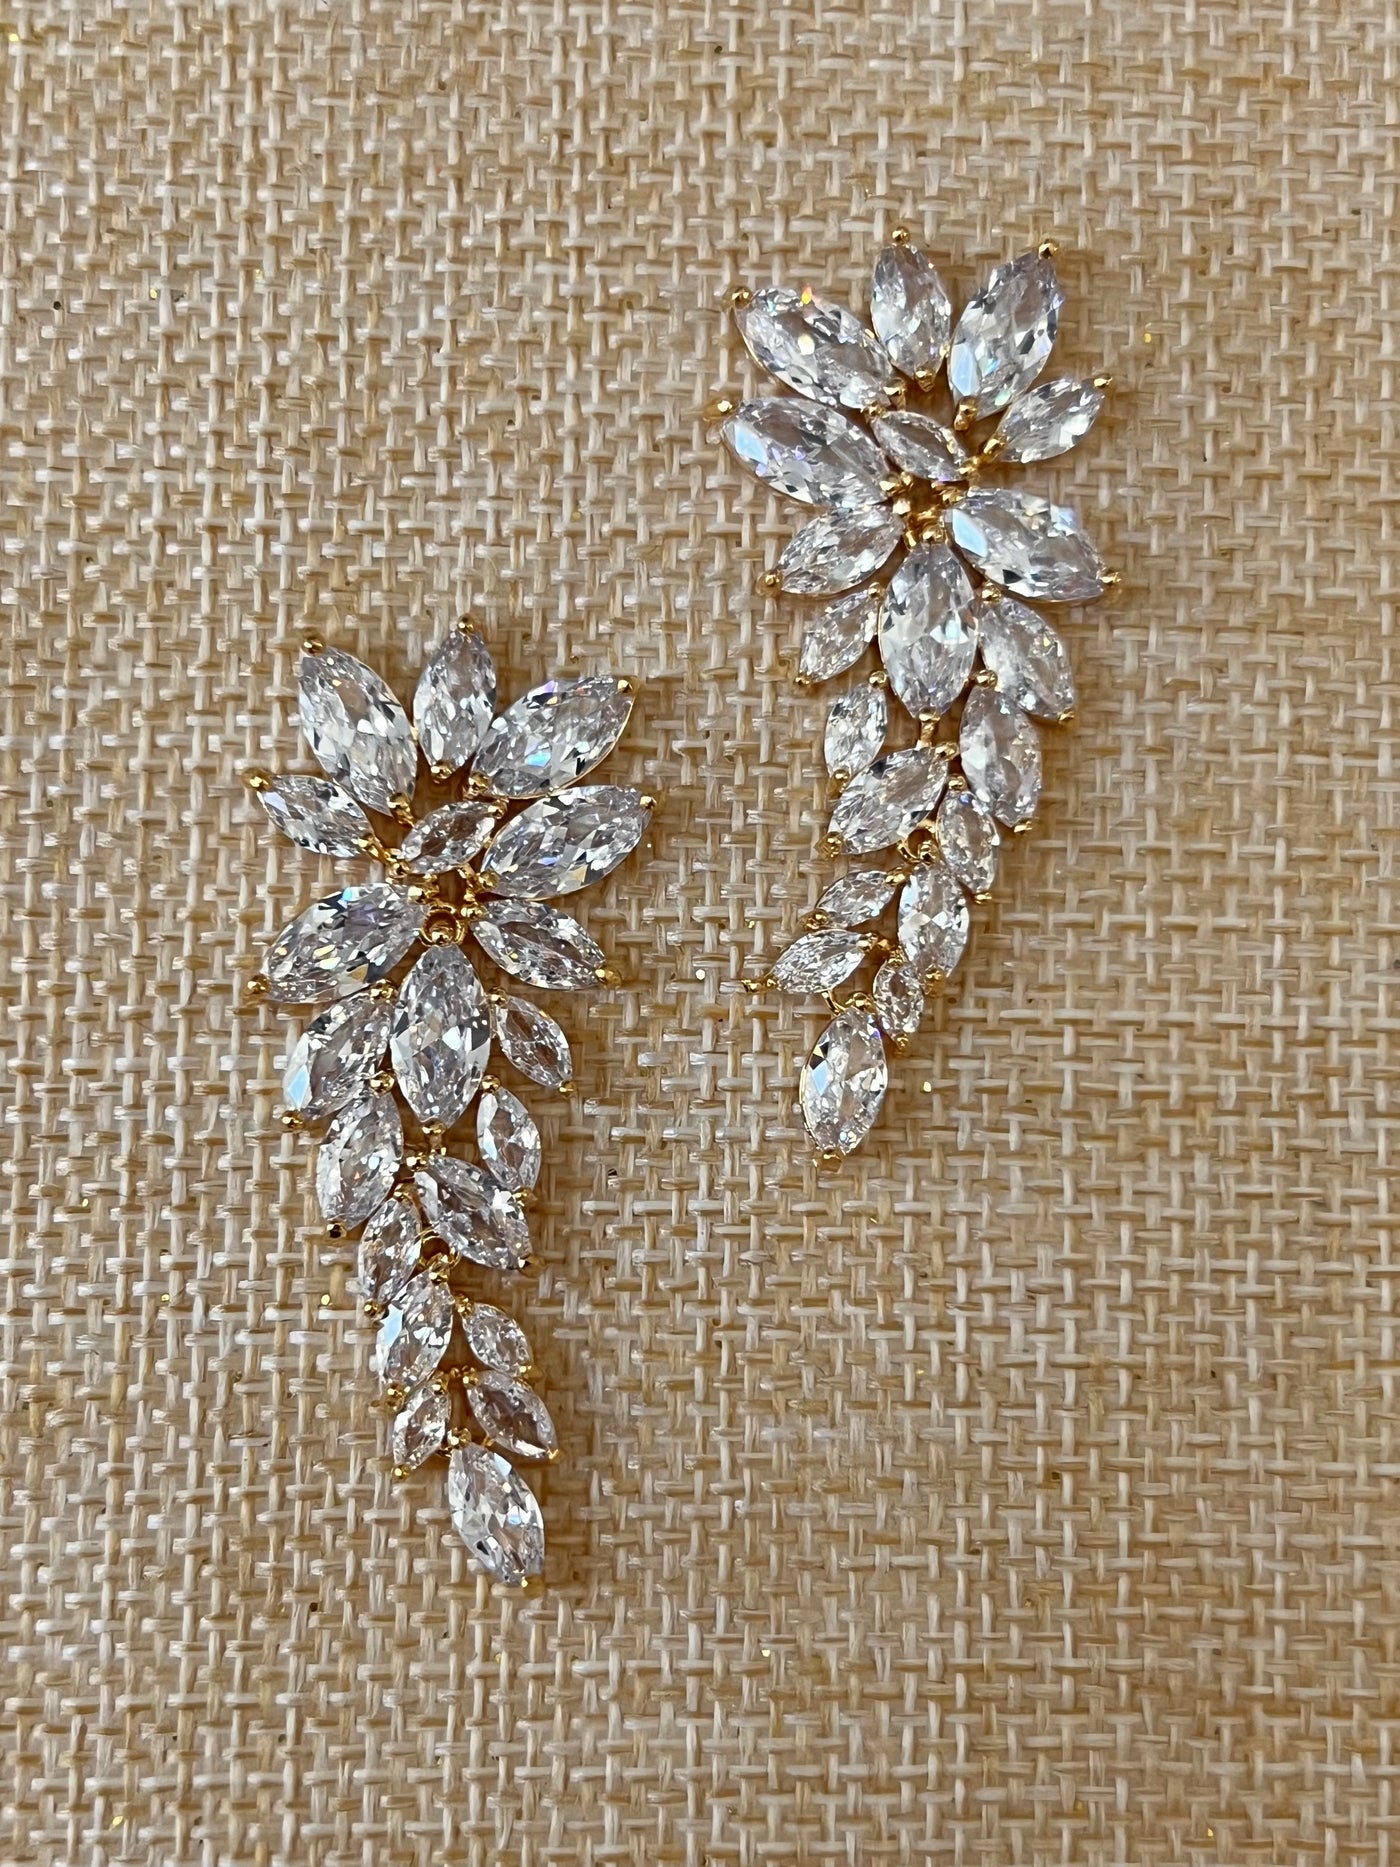 These dazzling earrings are crafted from the finest materials, from a single strand of Swarovski crystals to 18-karat white gold. These earrings will bring sophistication and elegance to your look.